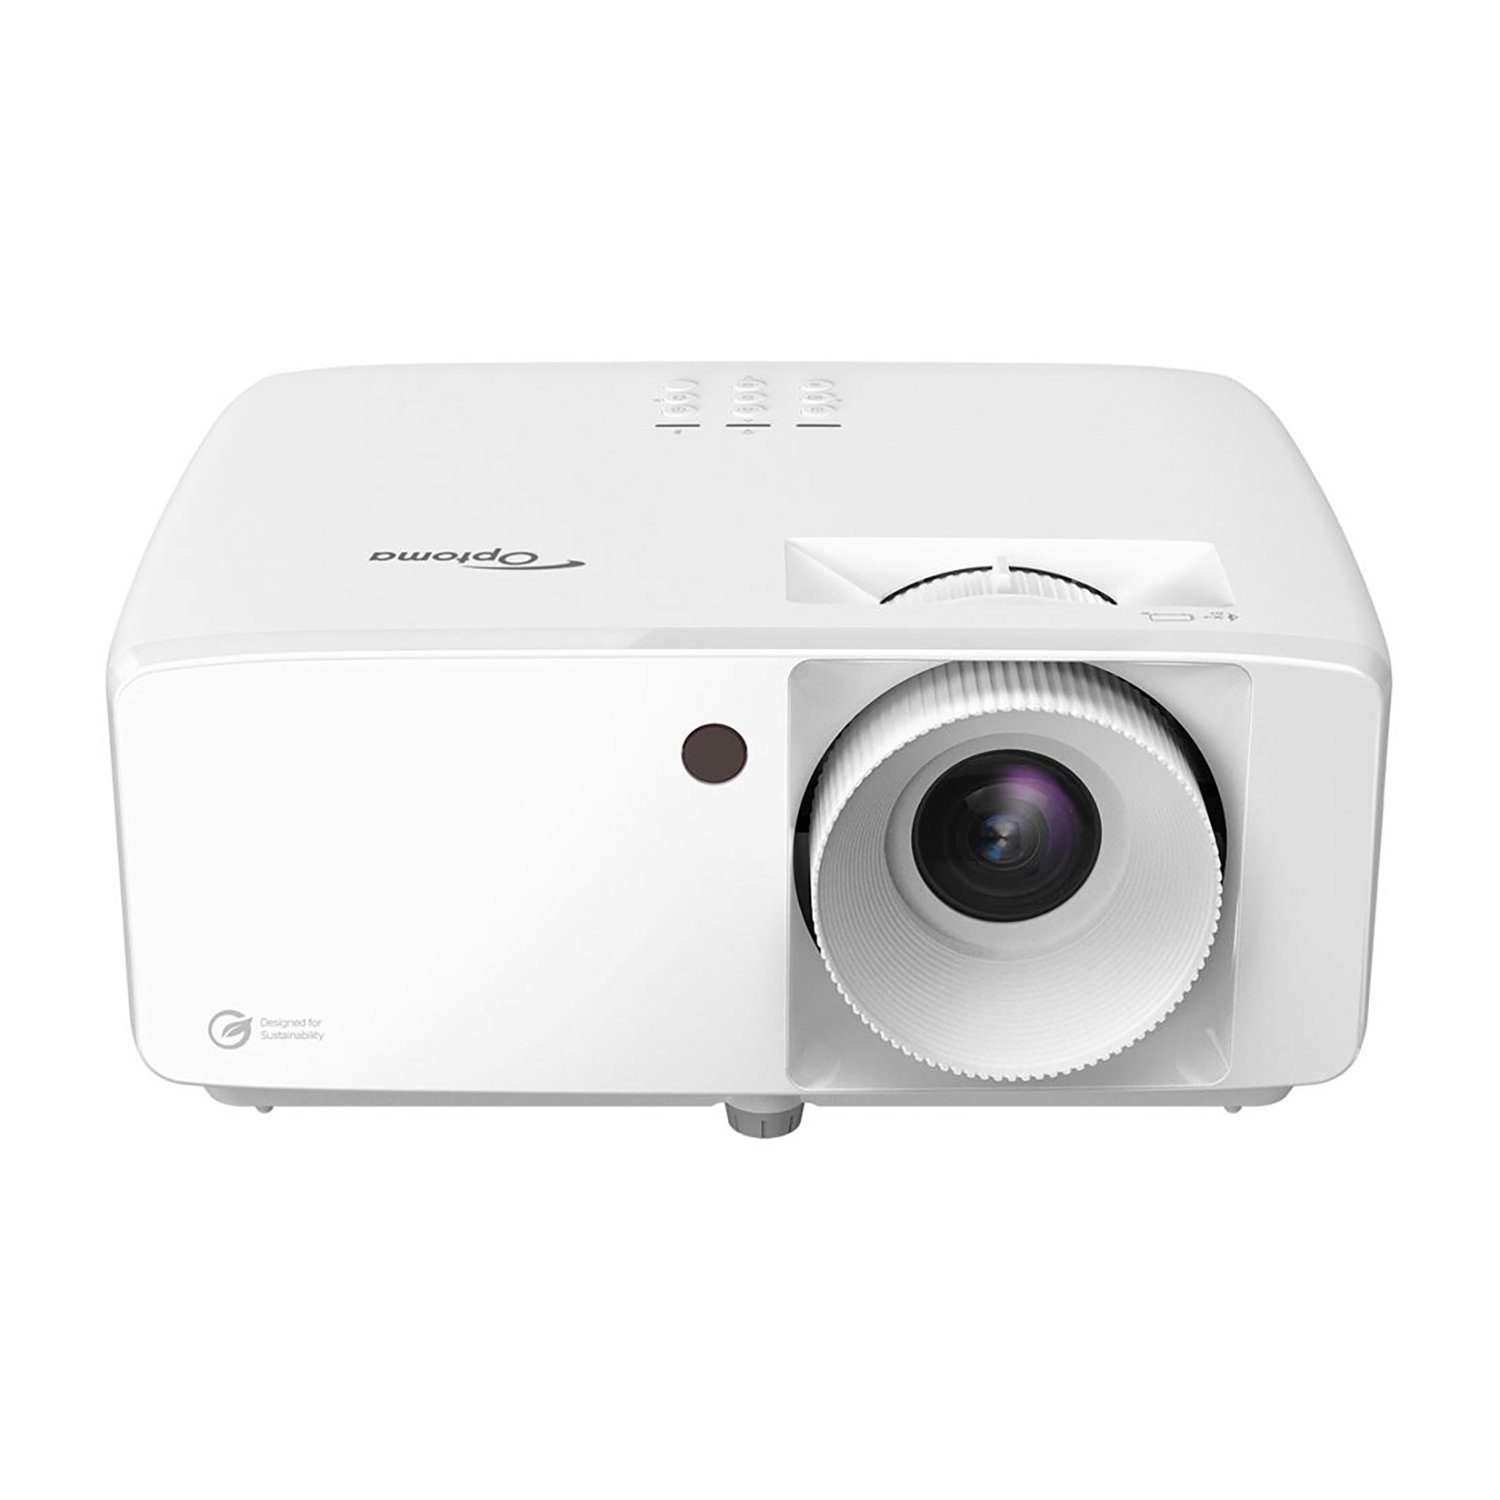 px) ZH520 Optoma x 1080 3000000:1, 1920 (5500 lm, 3D-Beamer